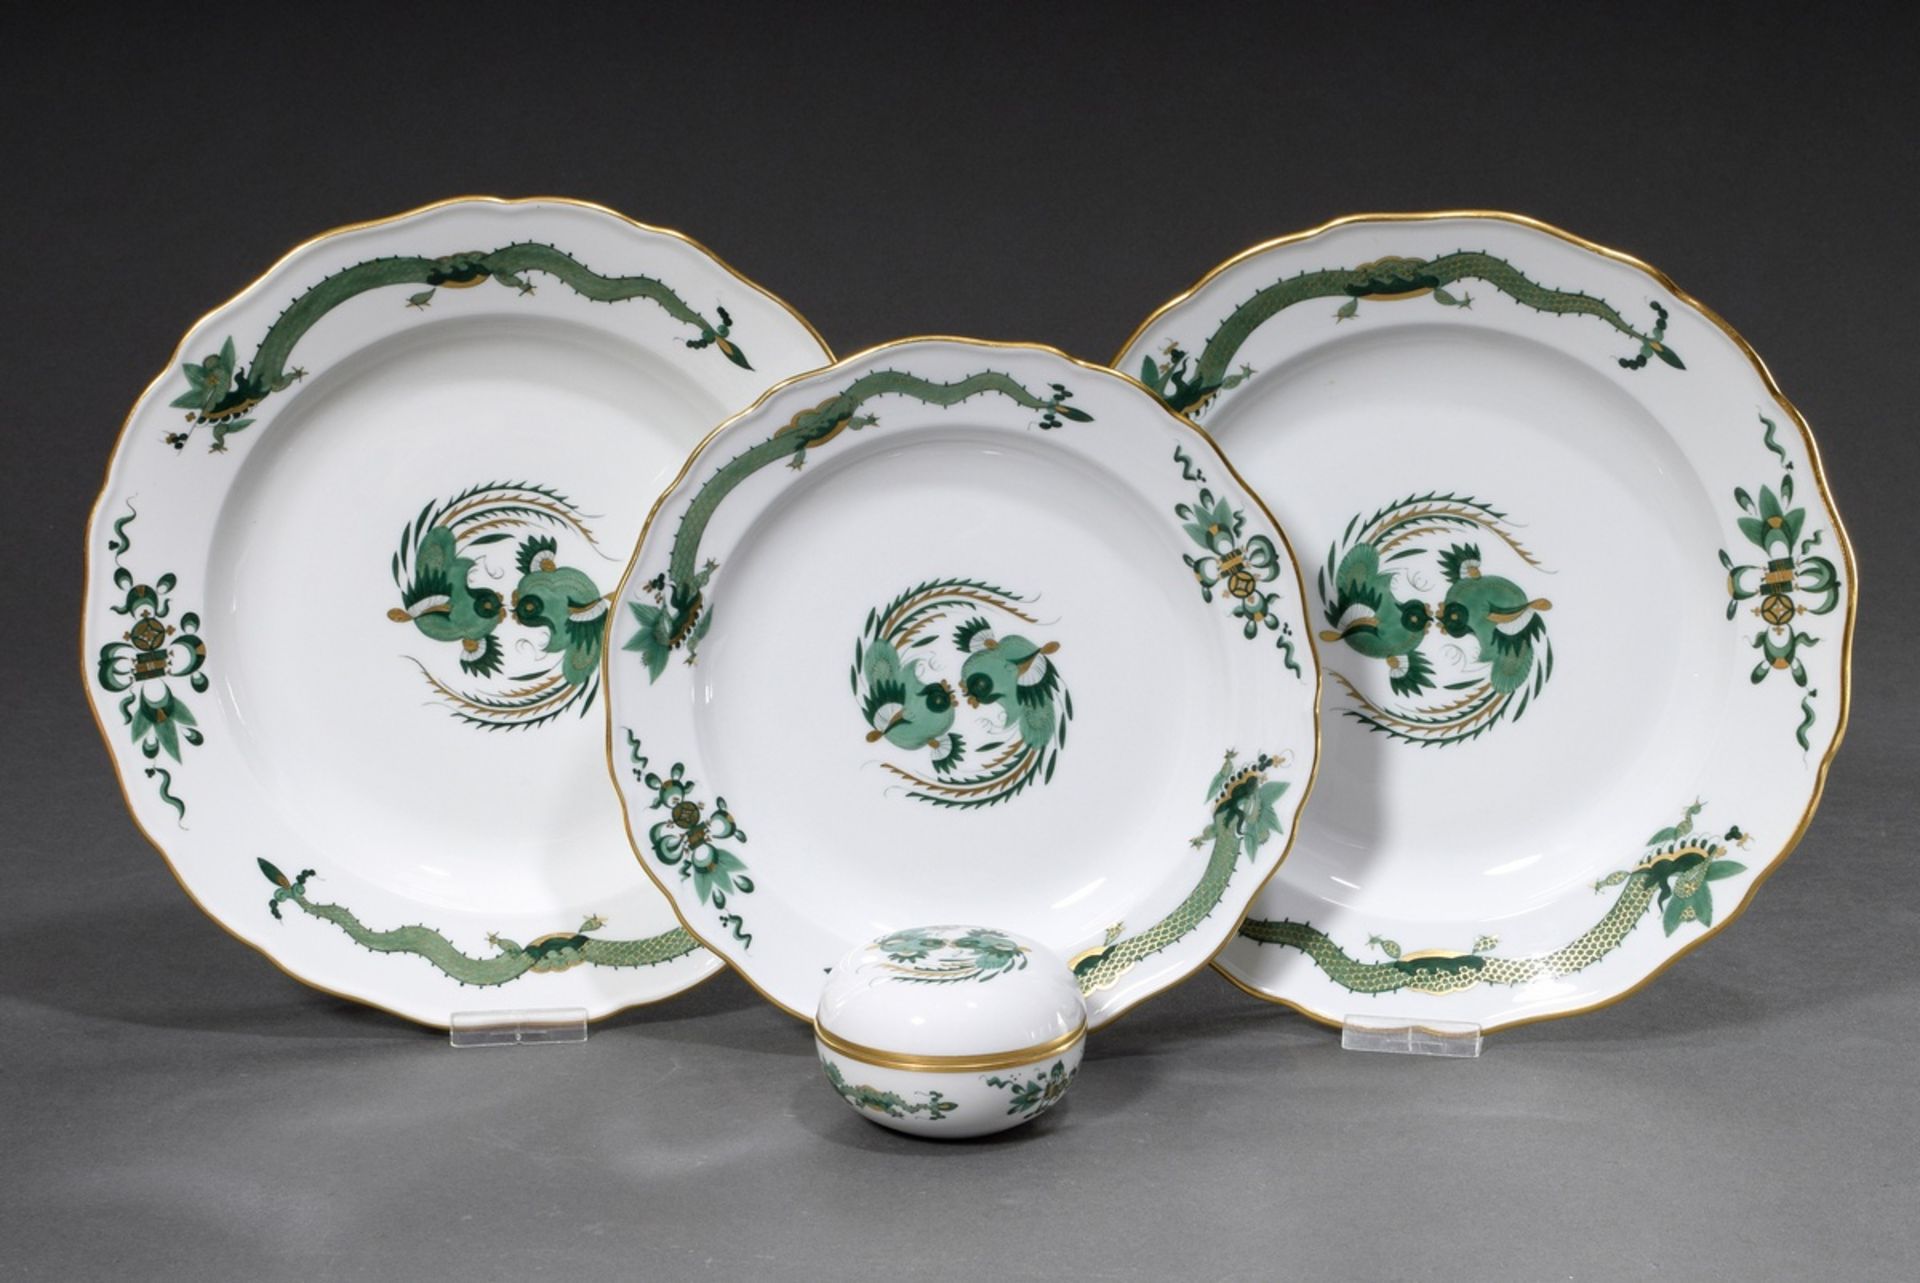 4 Various pieces Meissen "Rich green dragon" with gold rim, 20th century: 3 plates (Ø 21/25cm) and 